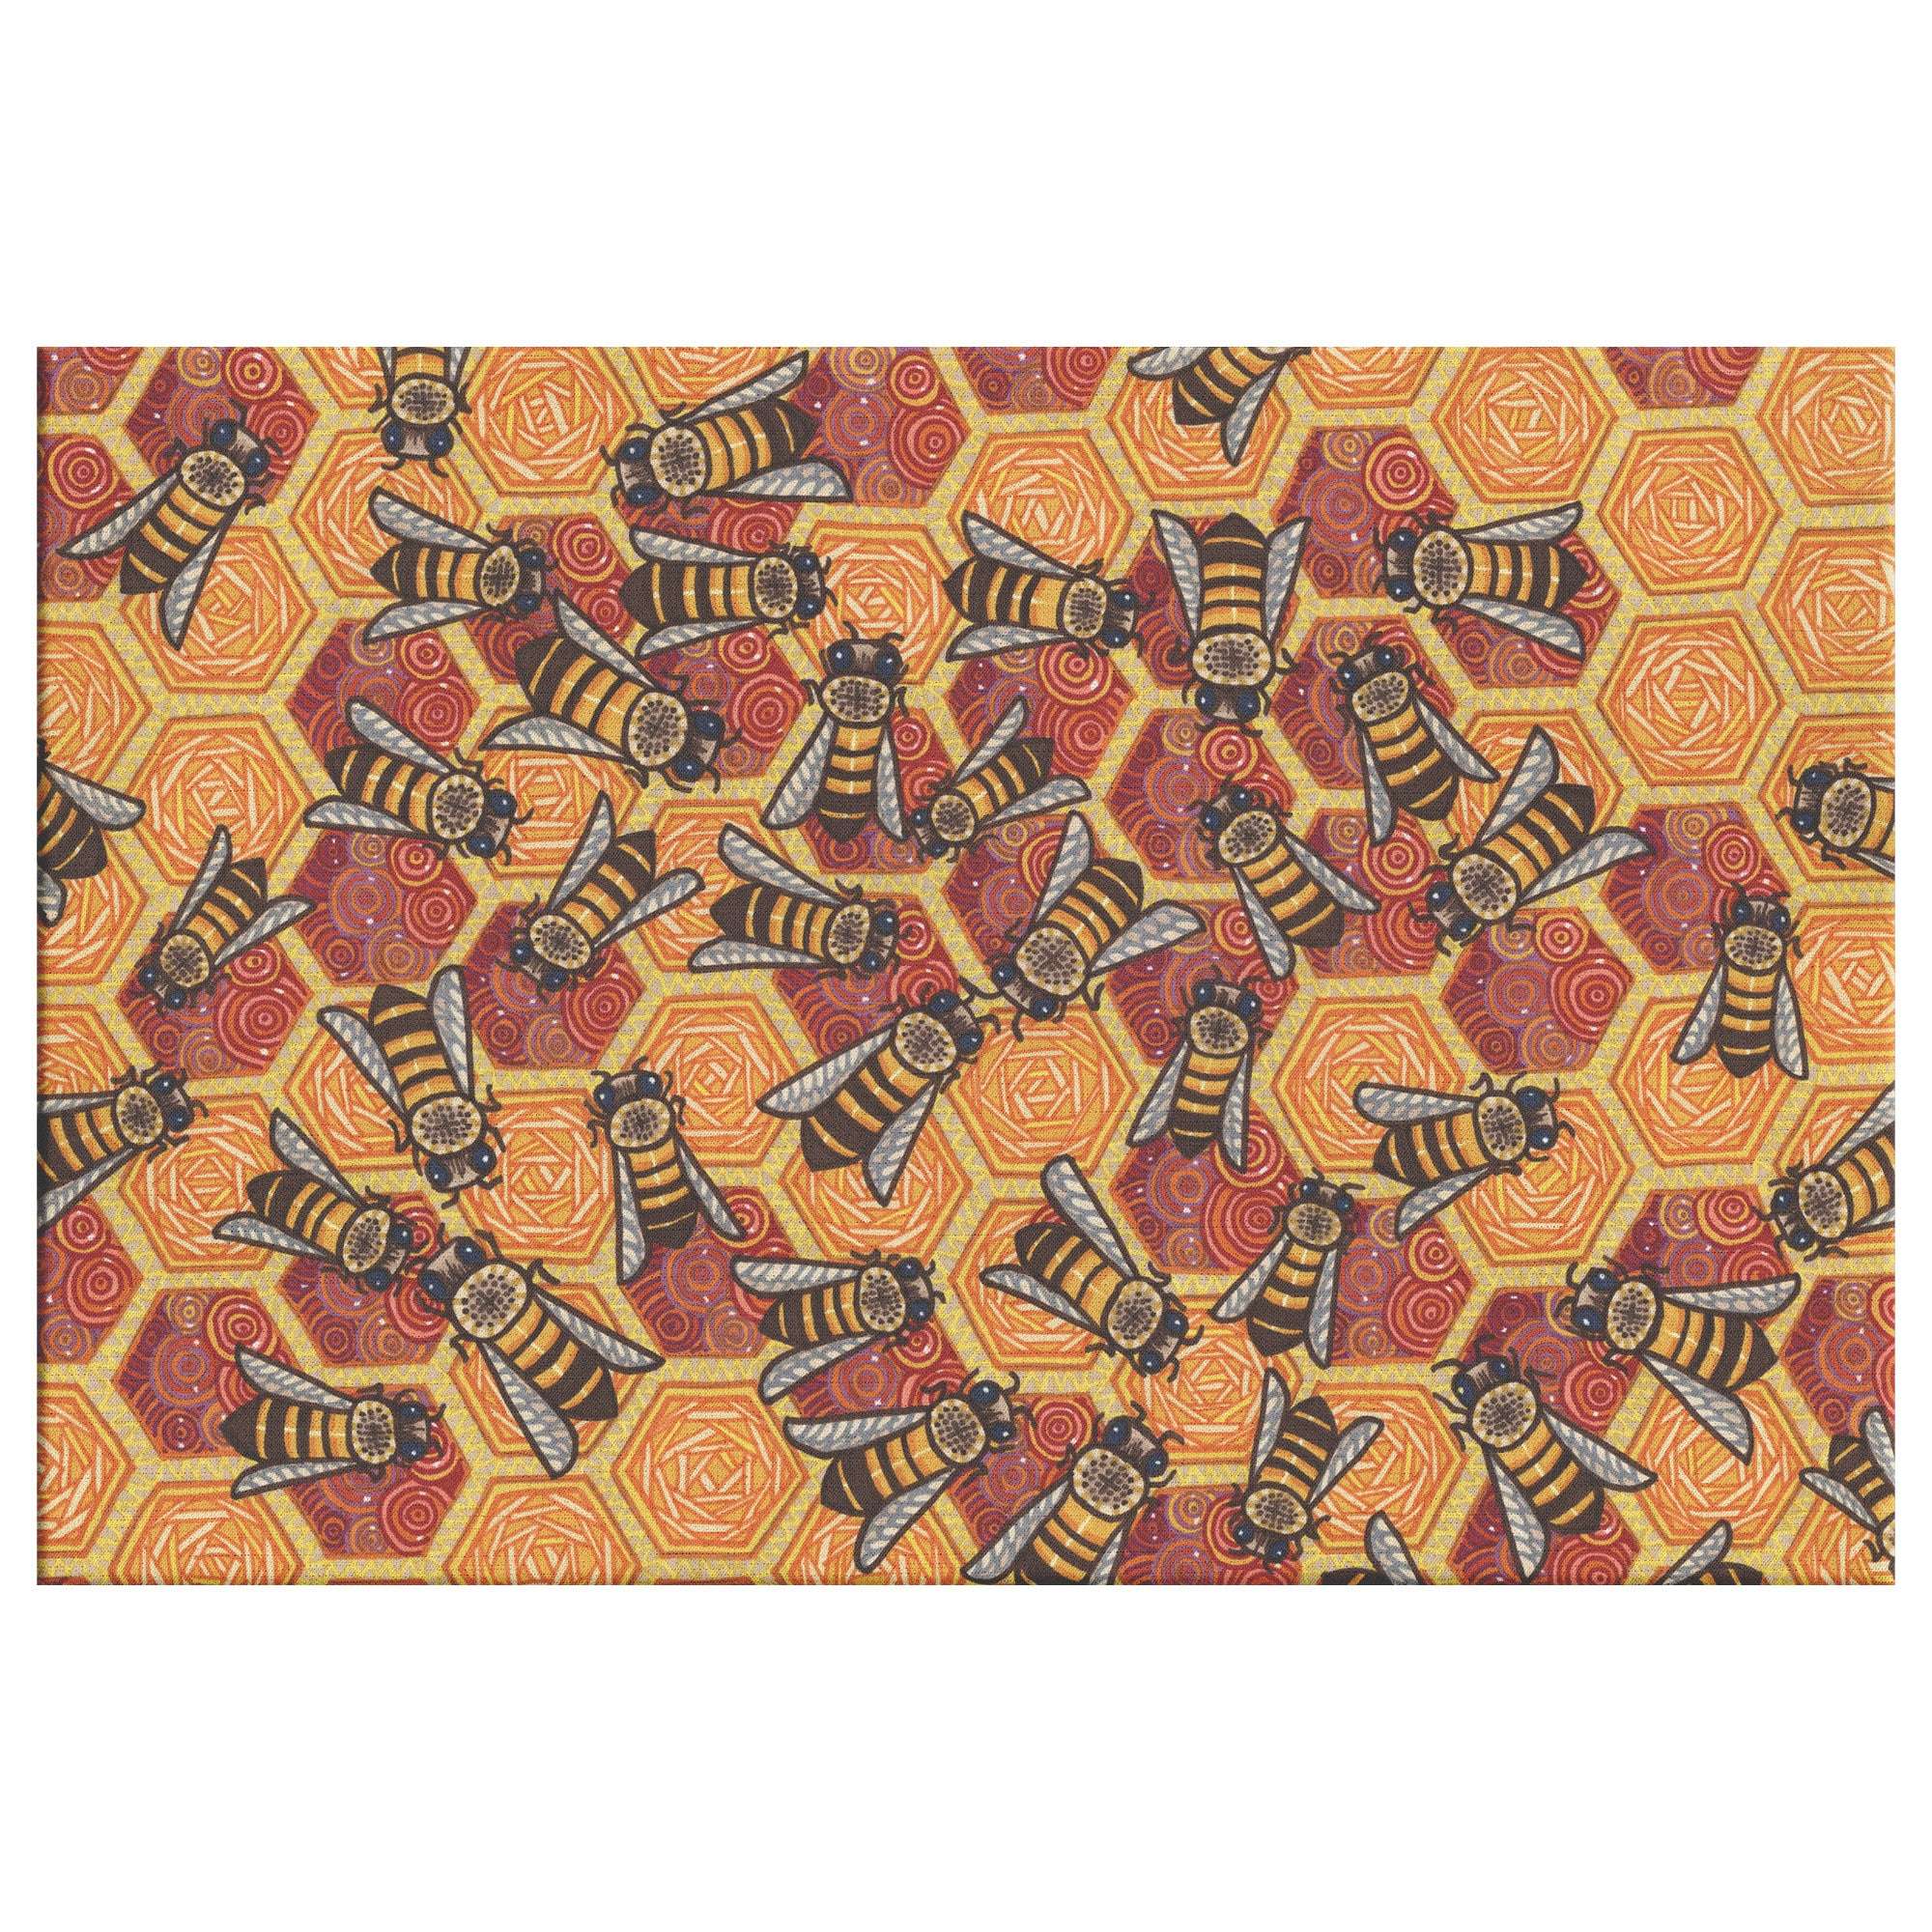 Honeycomb Harmony Canvas Print featuring a dense arrangement of bees and hexagonal designs in shades of orange, yellow, and brown.